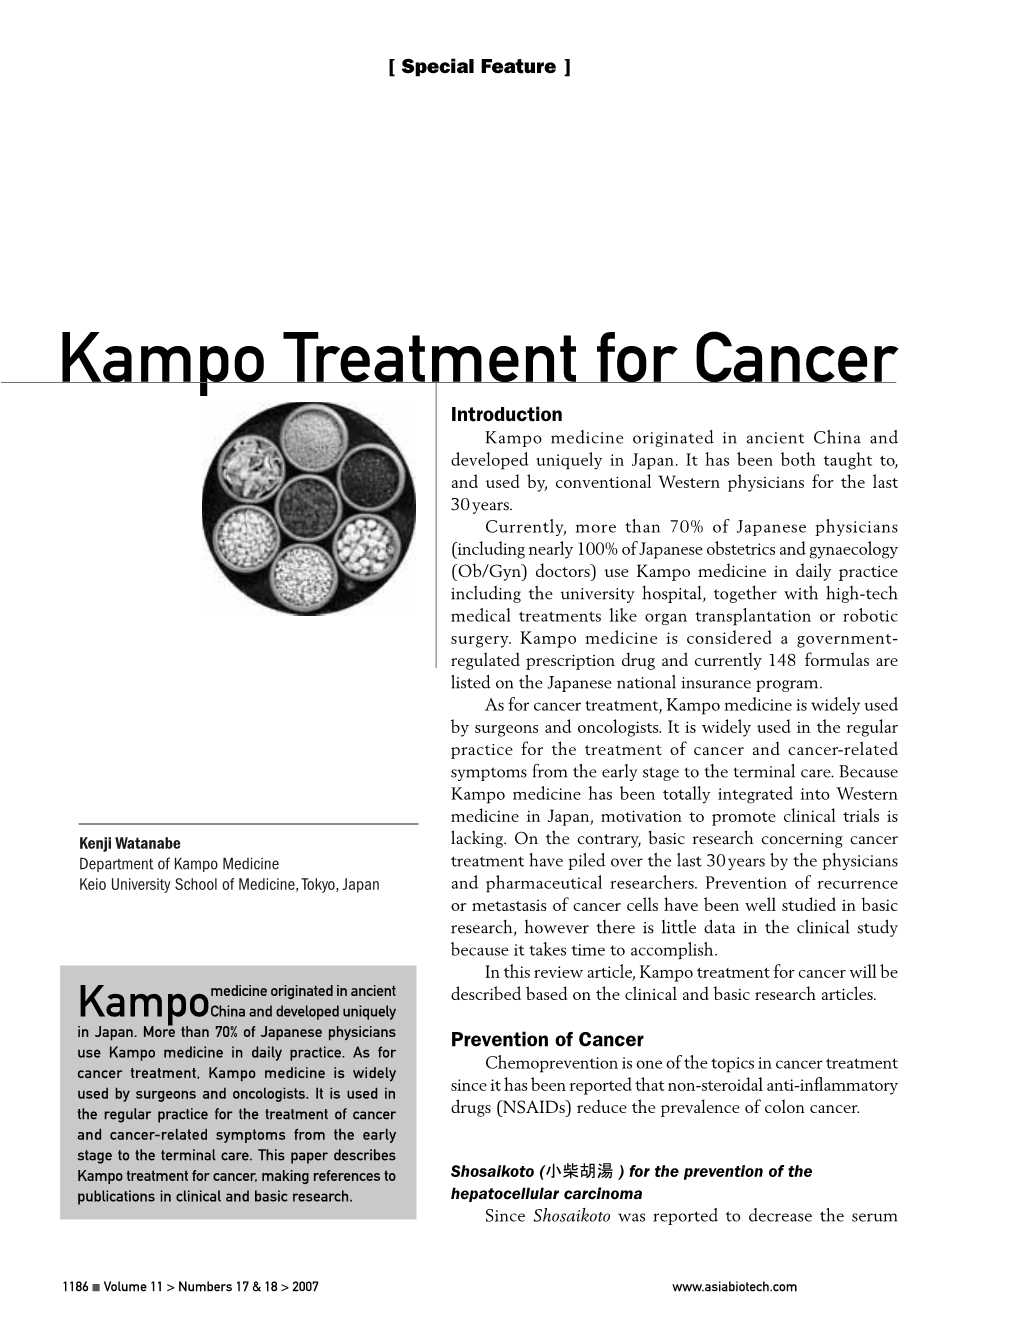 Kampo Treatment for Cancer Introduction Kampo Medicine Originated in Ancient China and Developed Uniquely in Japan